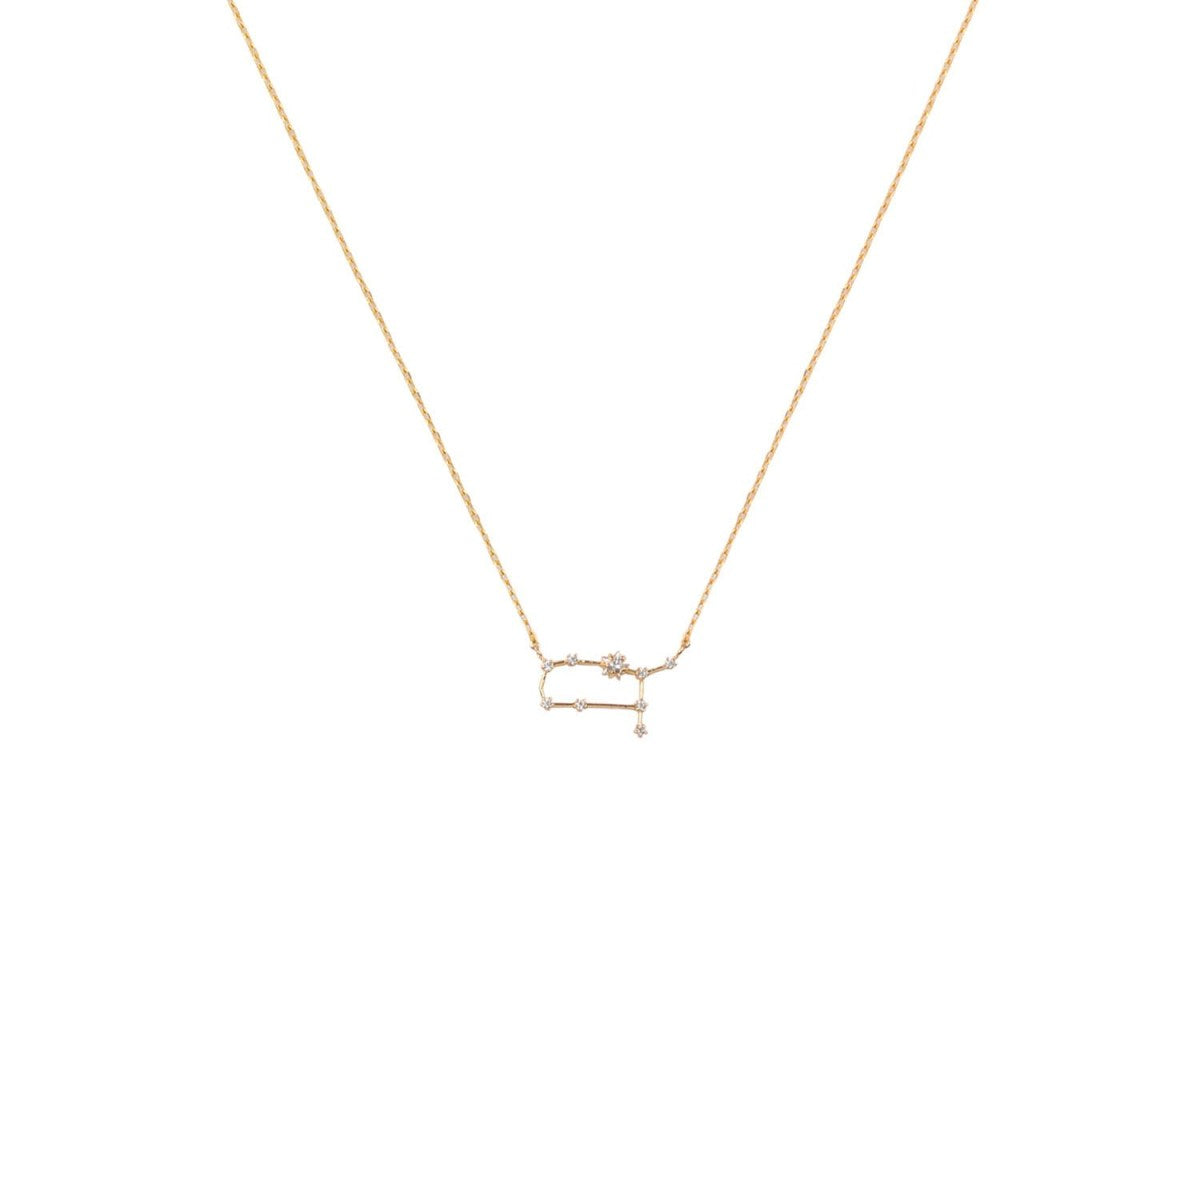 The Nadia Gold Dipped Constellation Necklace